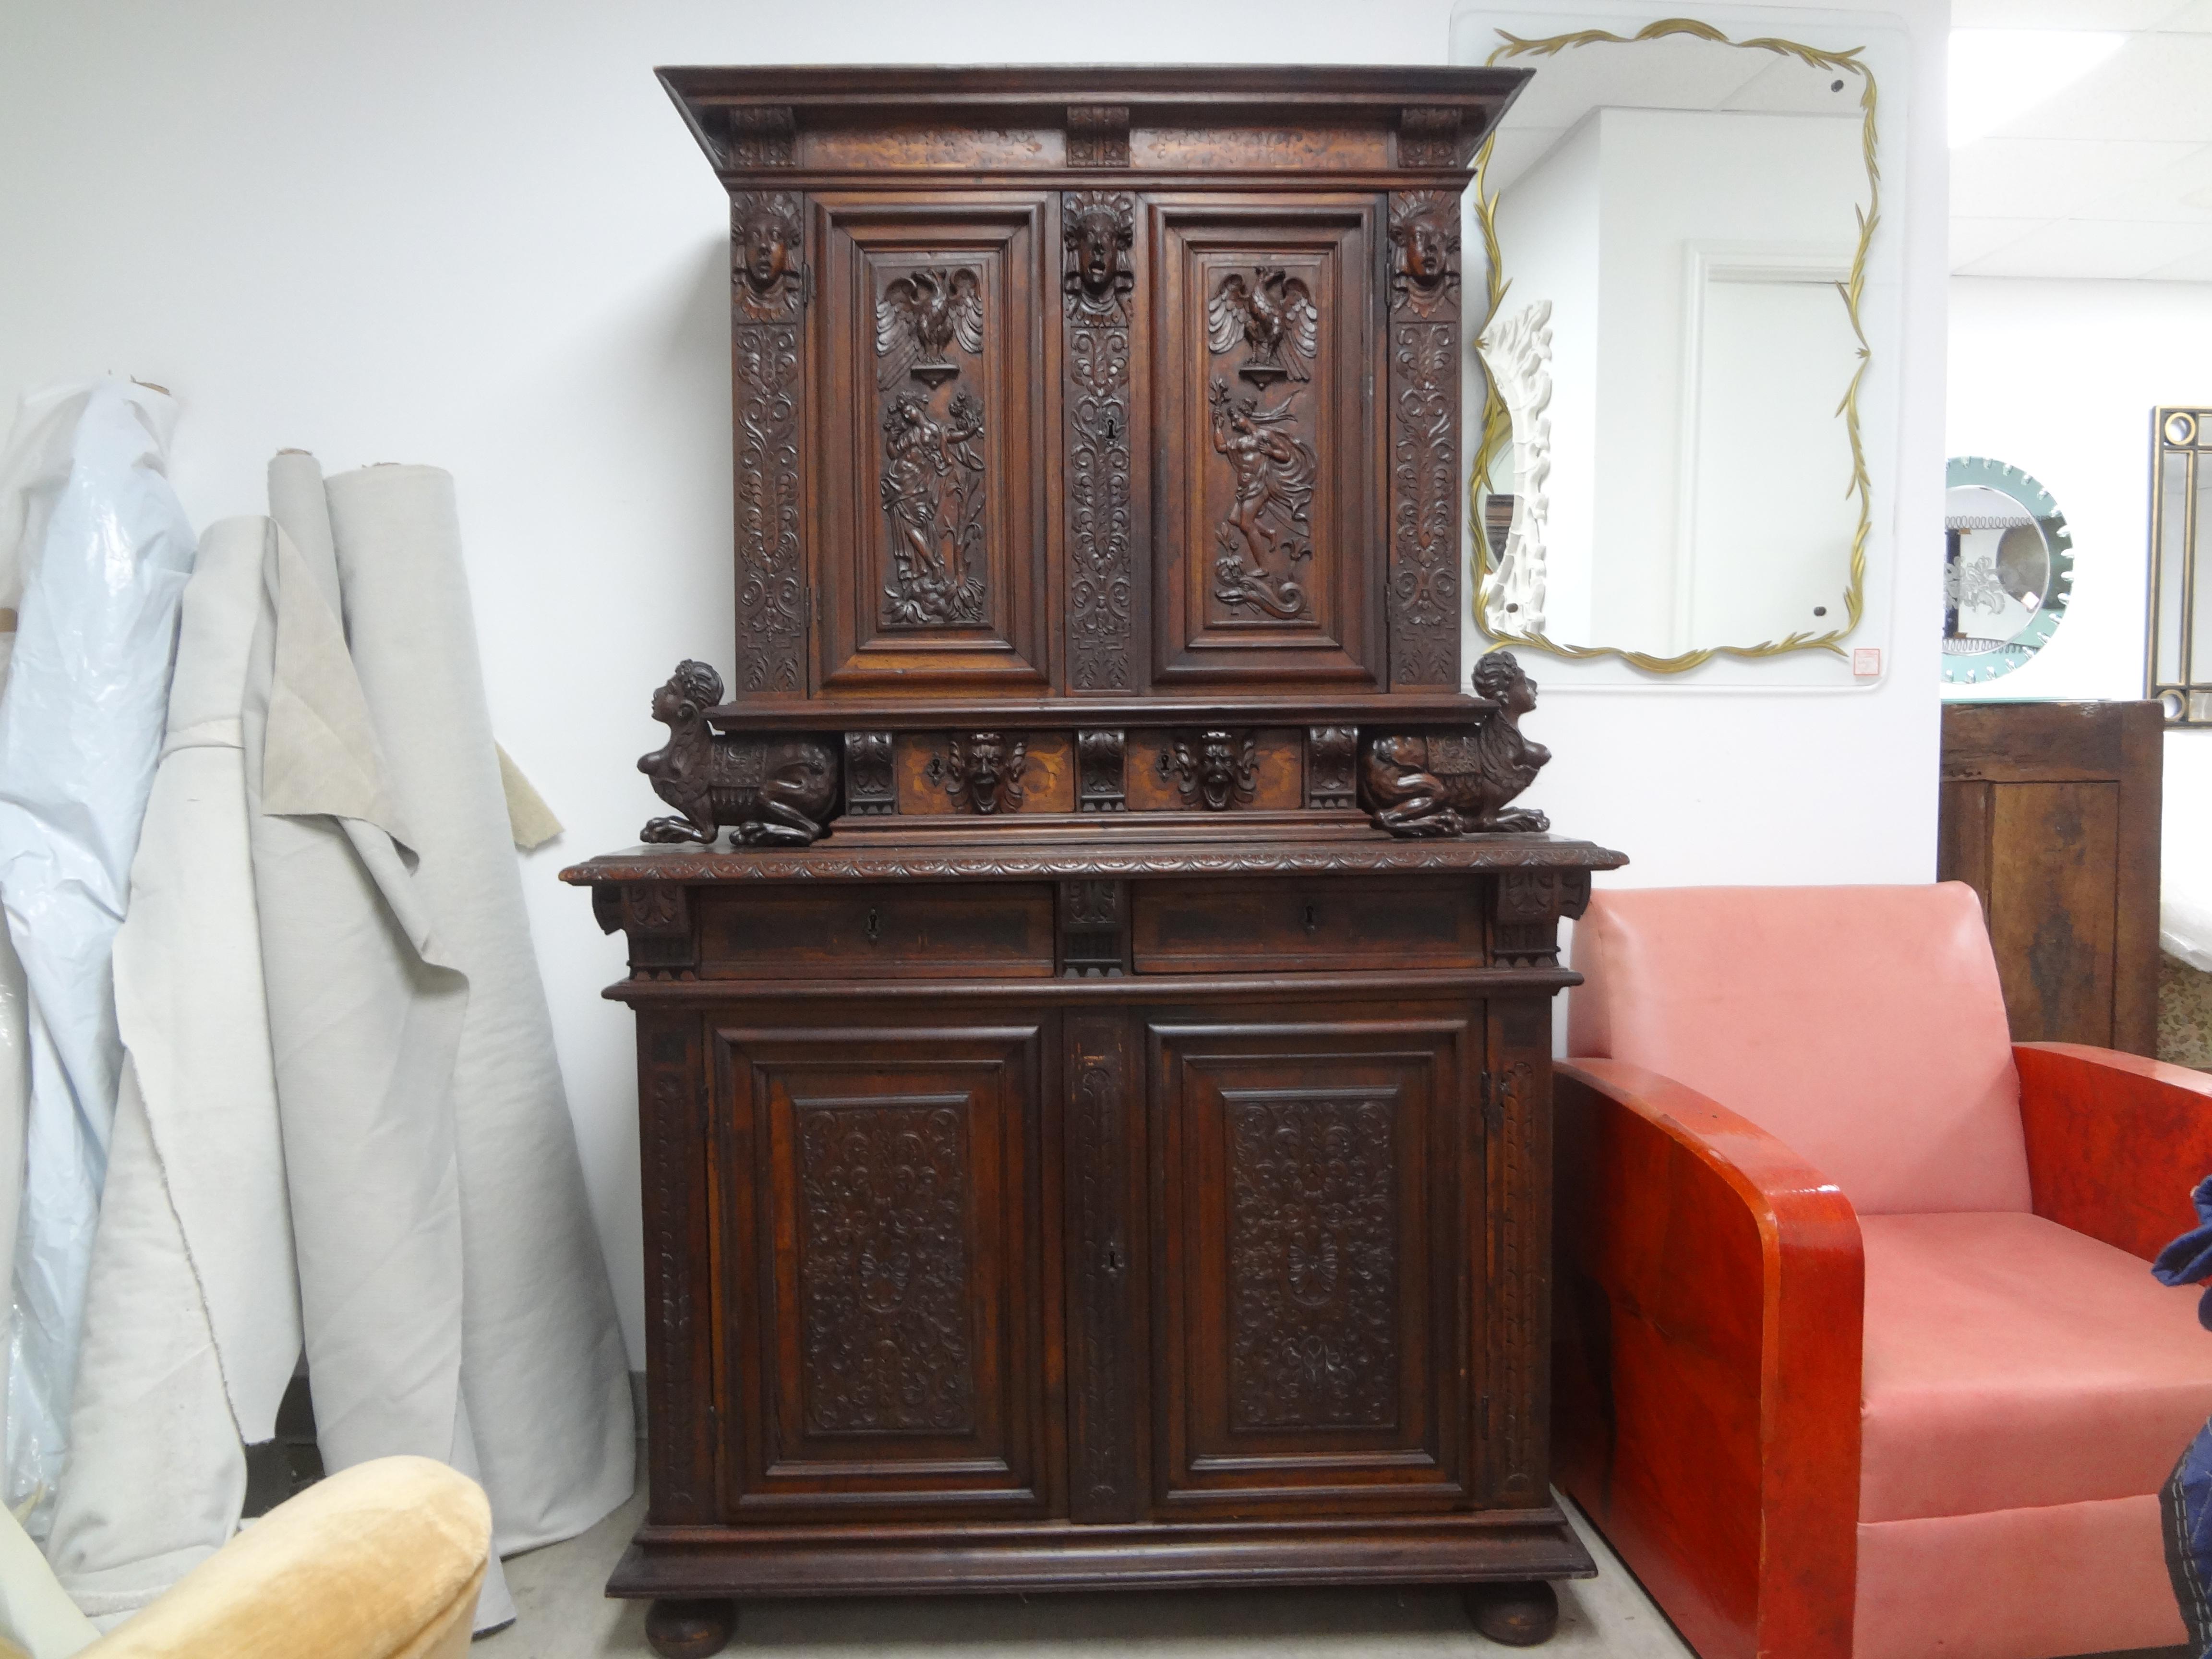 18th Century French Baroque Cabinet Or Deux Corp.
This handsome antique French Baroque cabinet has plenty of storage. with two door above three drawers and two doors below. 
Our versatile French deux corp can be used in many rooms including entrance